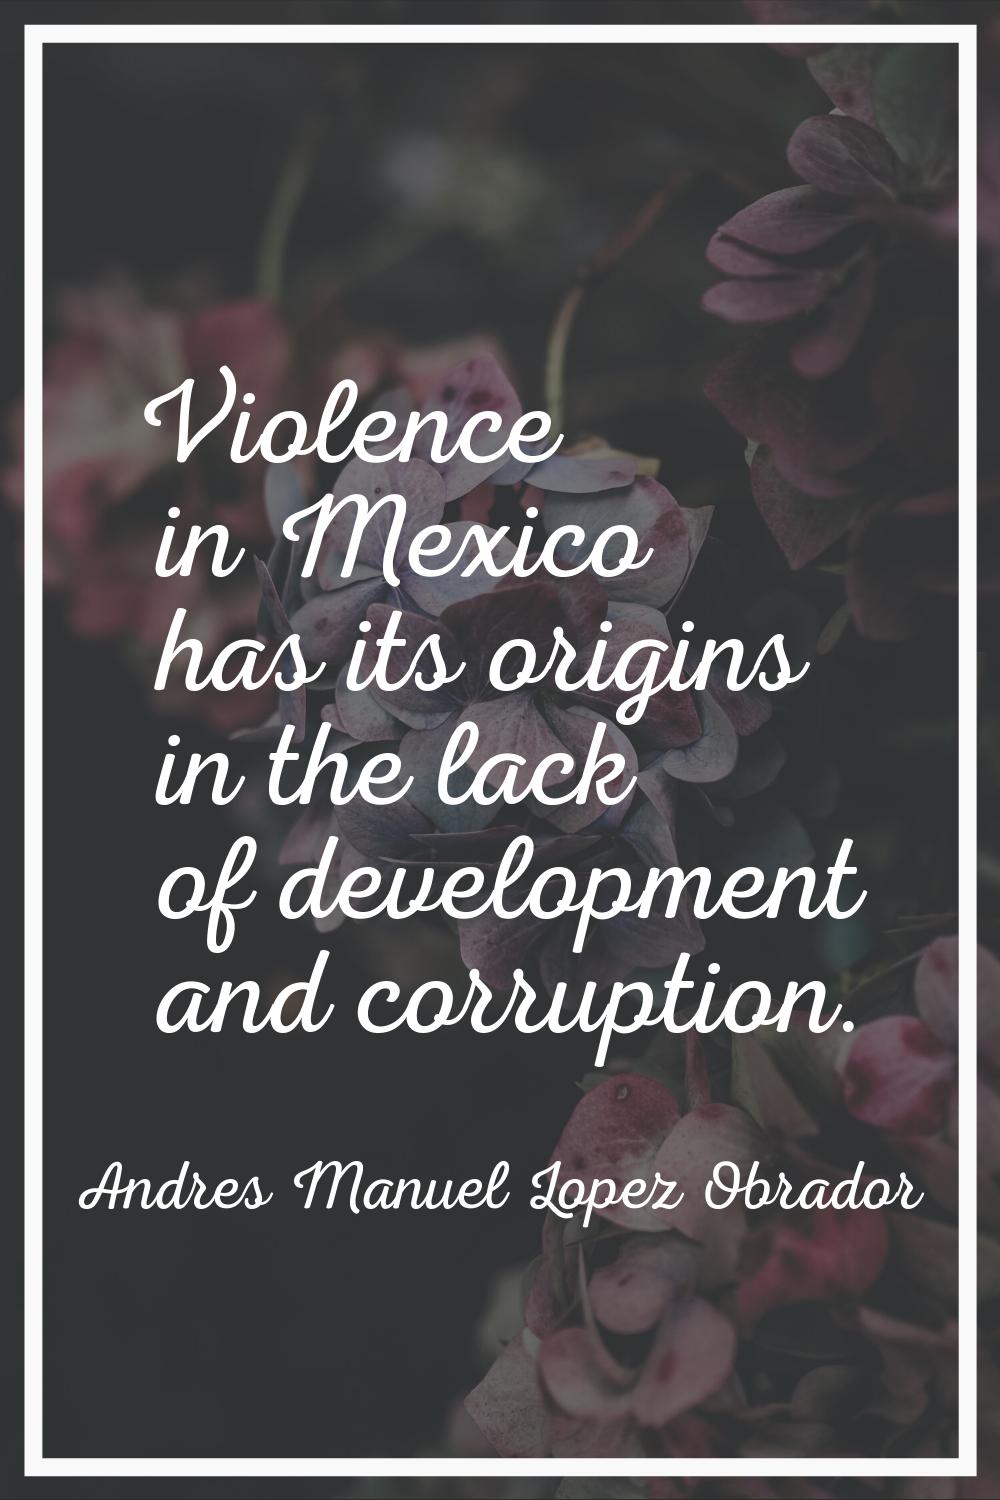 Violence in Mexico has its origins in the lack of development and corruption.